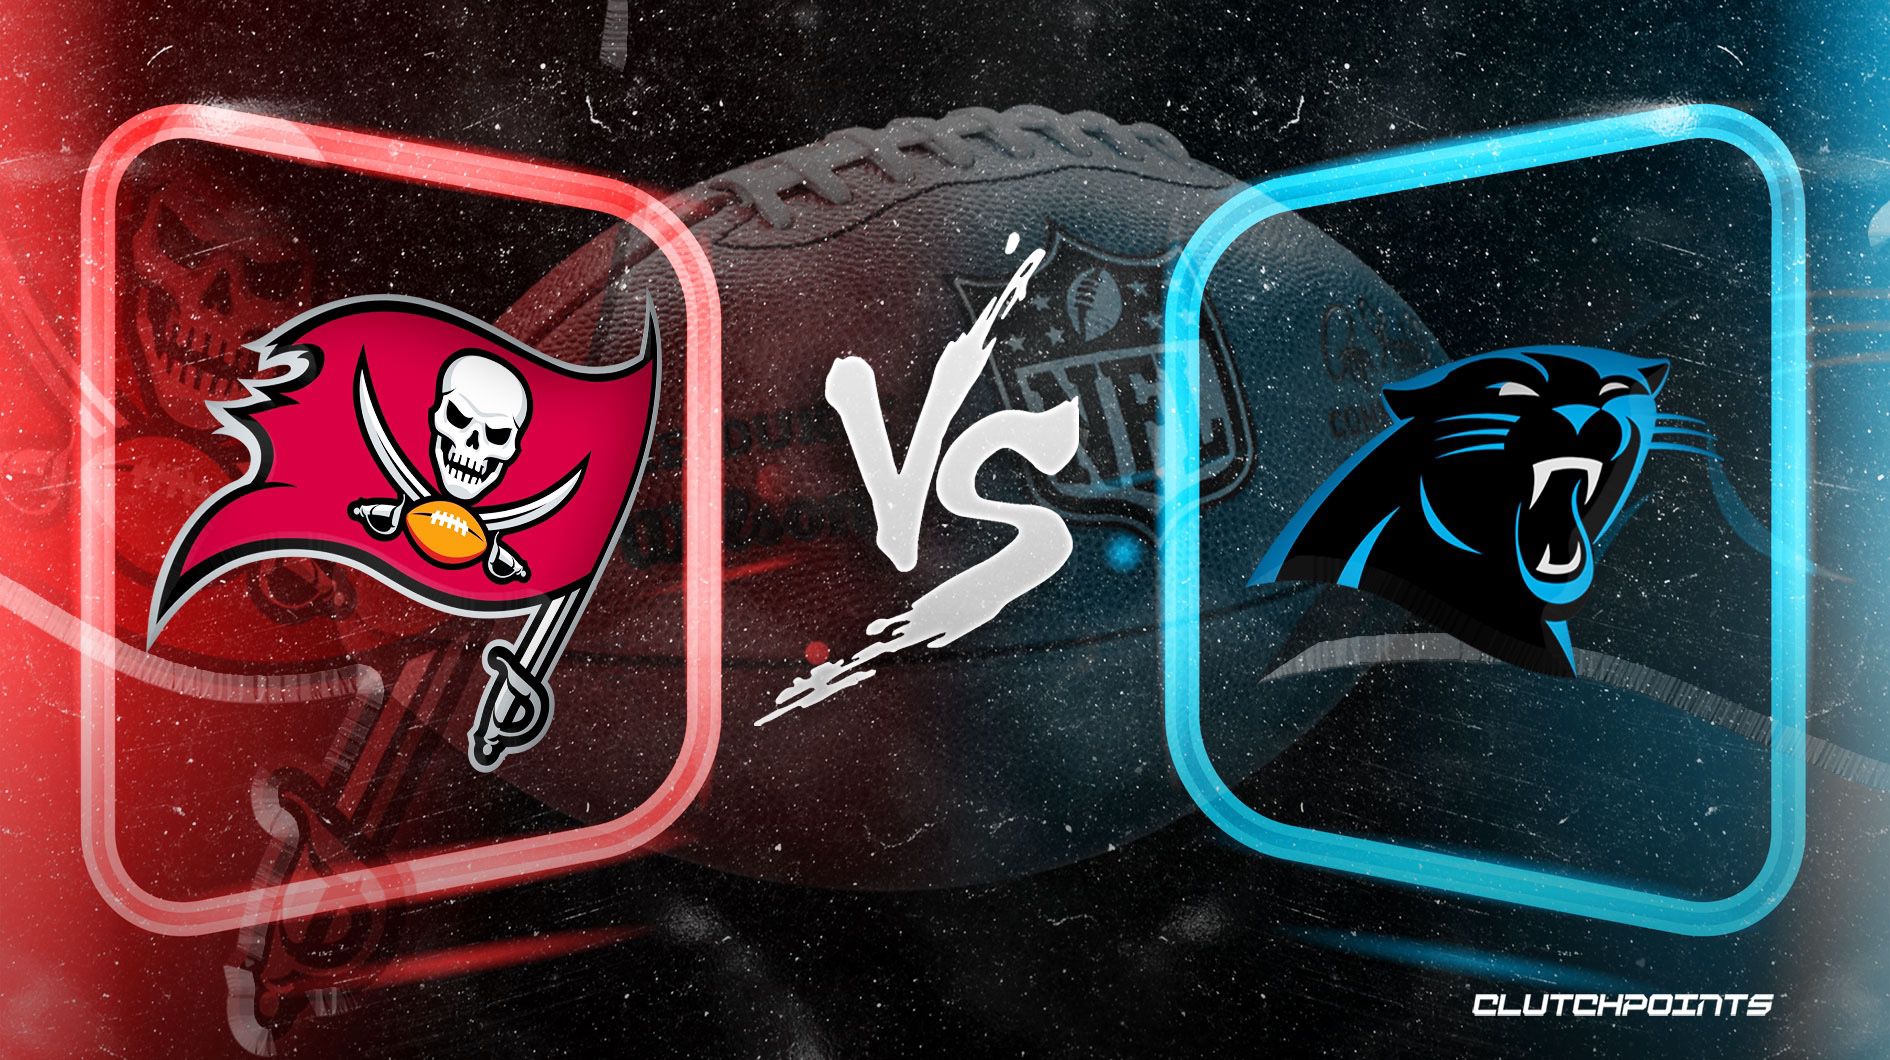 Bucs Vs Panthers New Years Day!